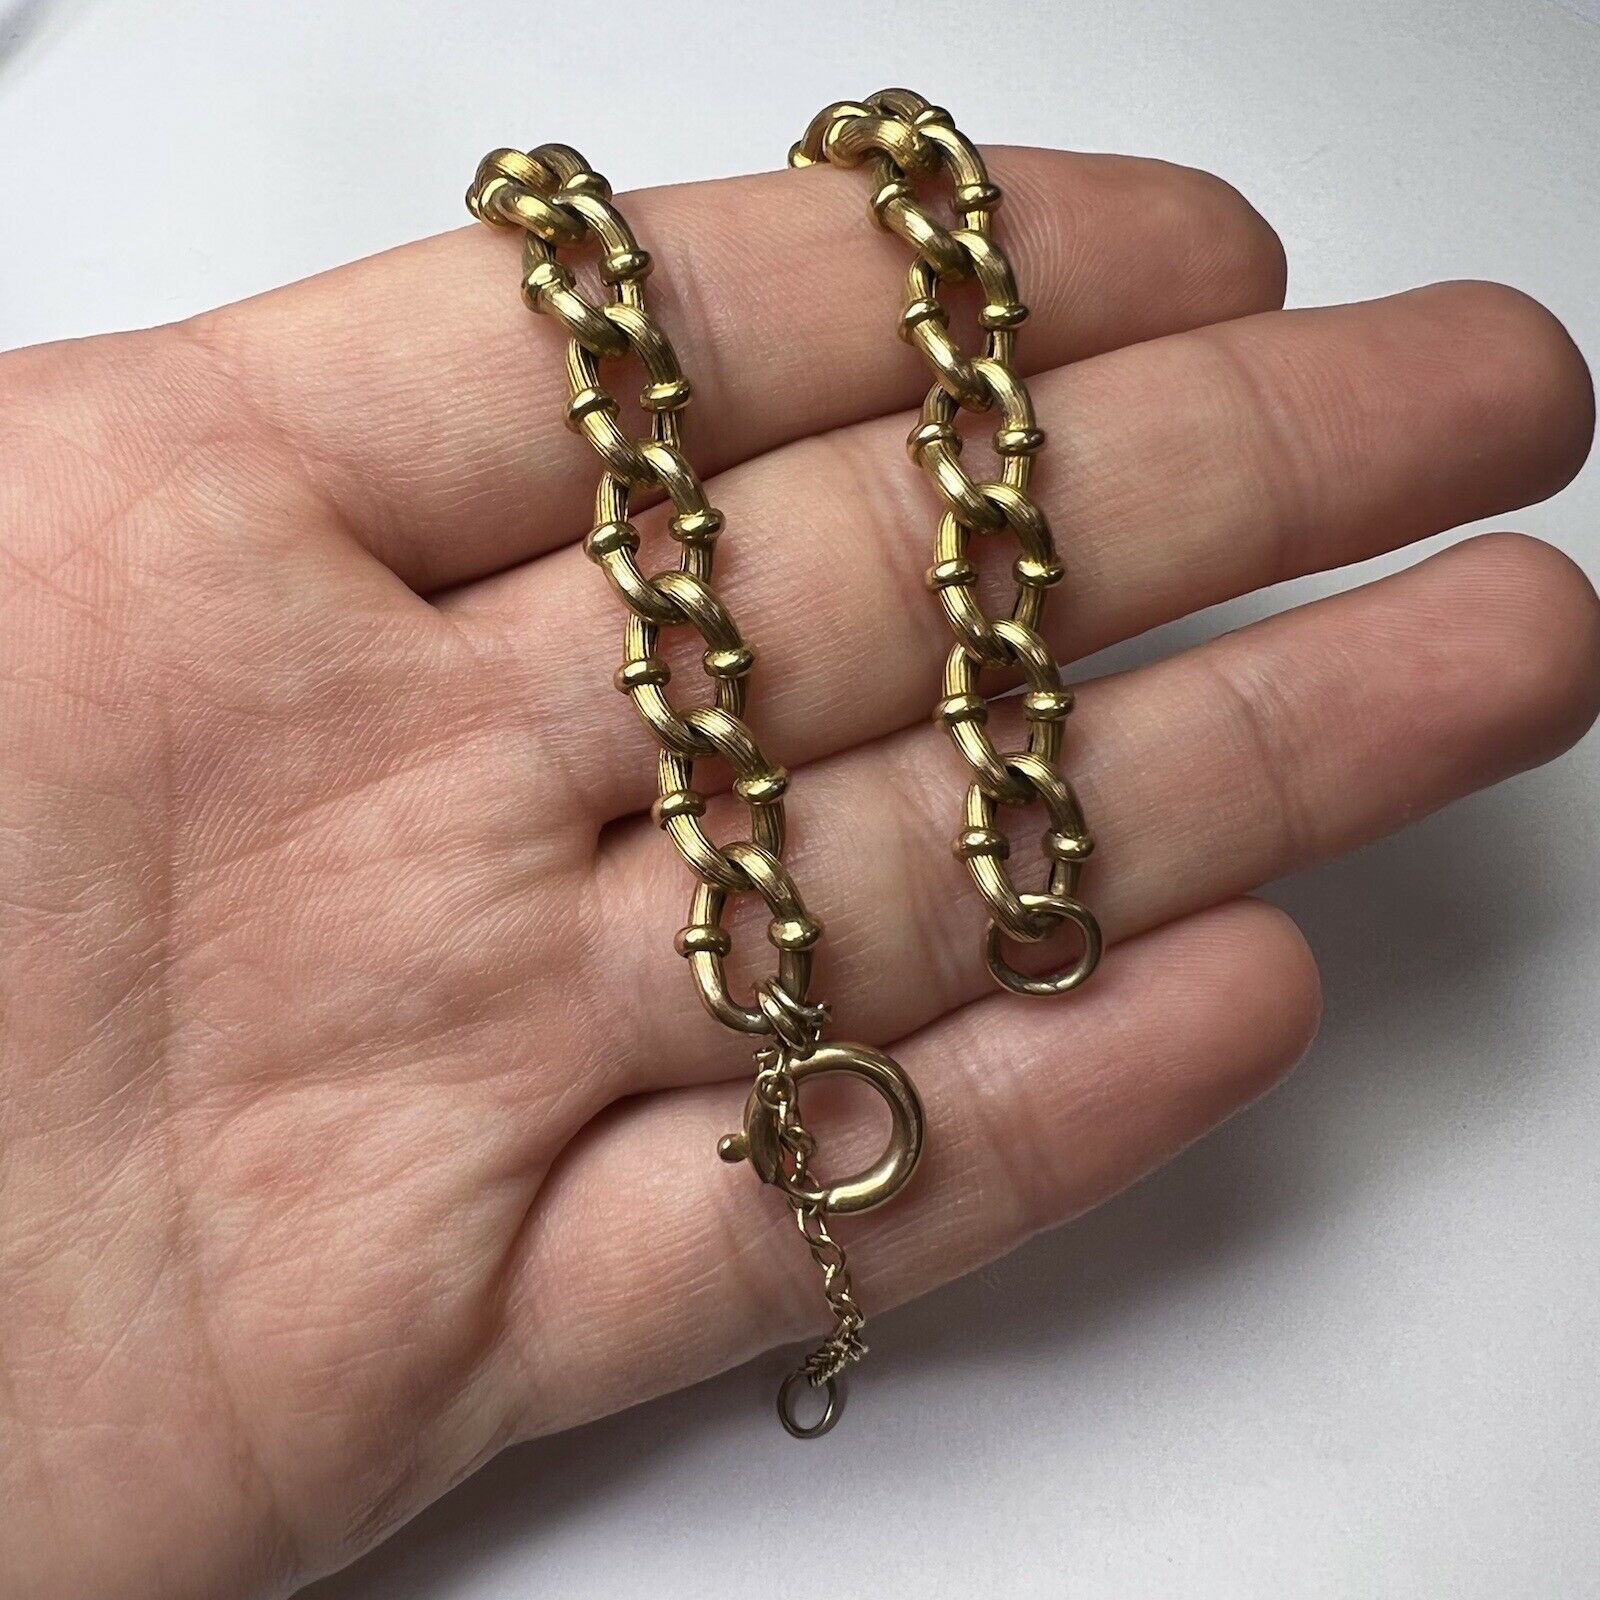 Solid 18K Yellow Gold Antique Victorian Curb Link Chain Bracelet 8"